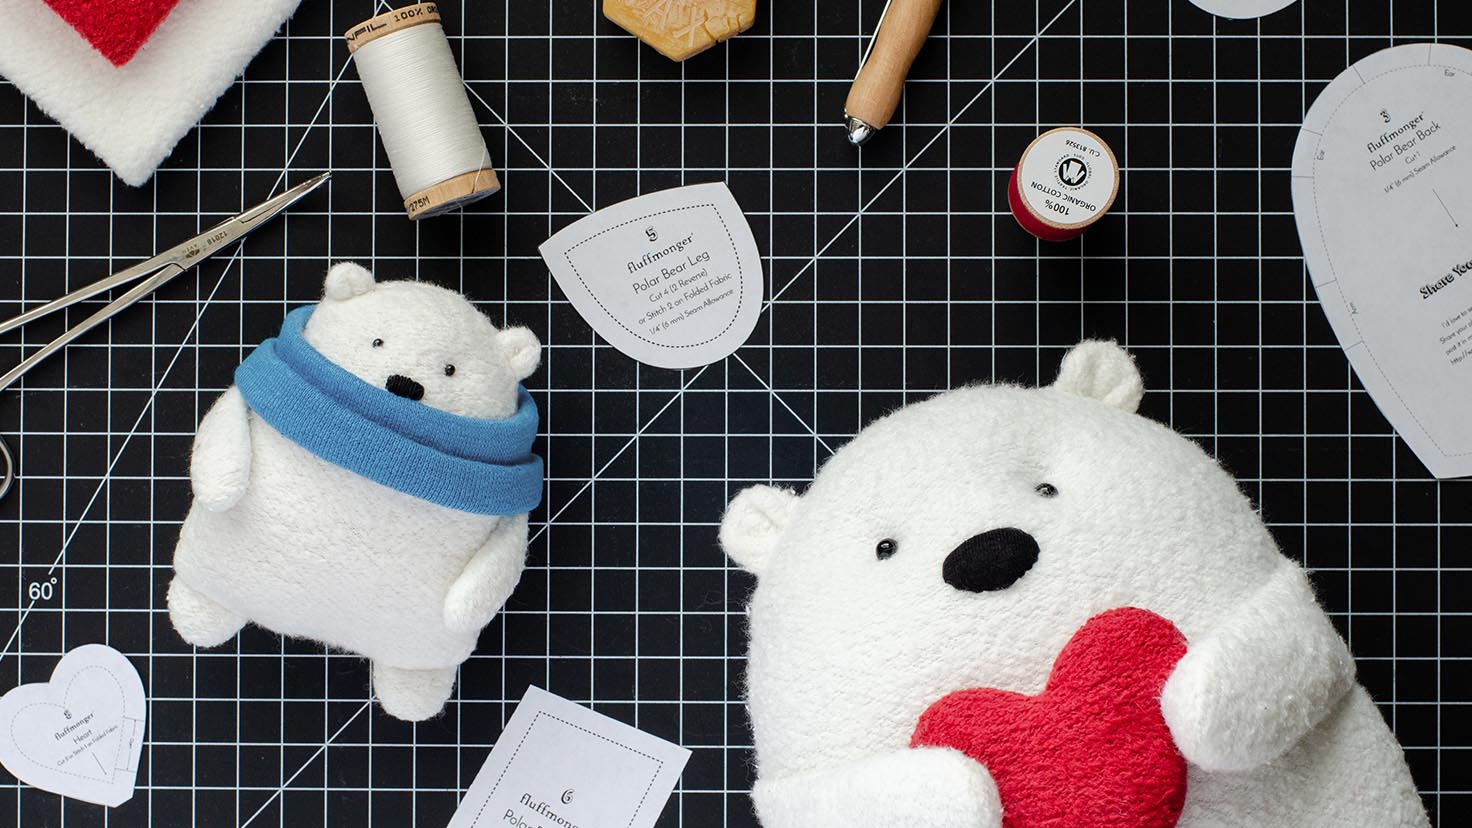 Glacé POLAR BEAR Softy FREE POST 12 Inch Fabric Polar Bear & Easy Tutorial Style Instructions Soft Toy Sewing PATTERN Independent Design 